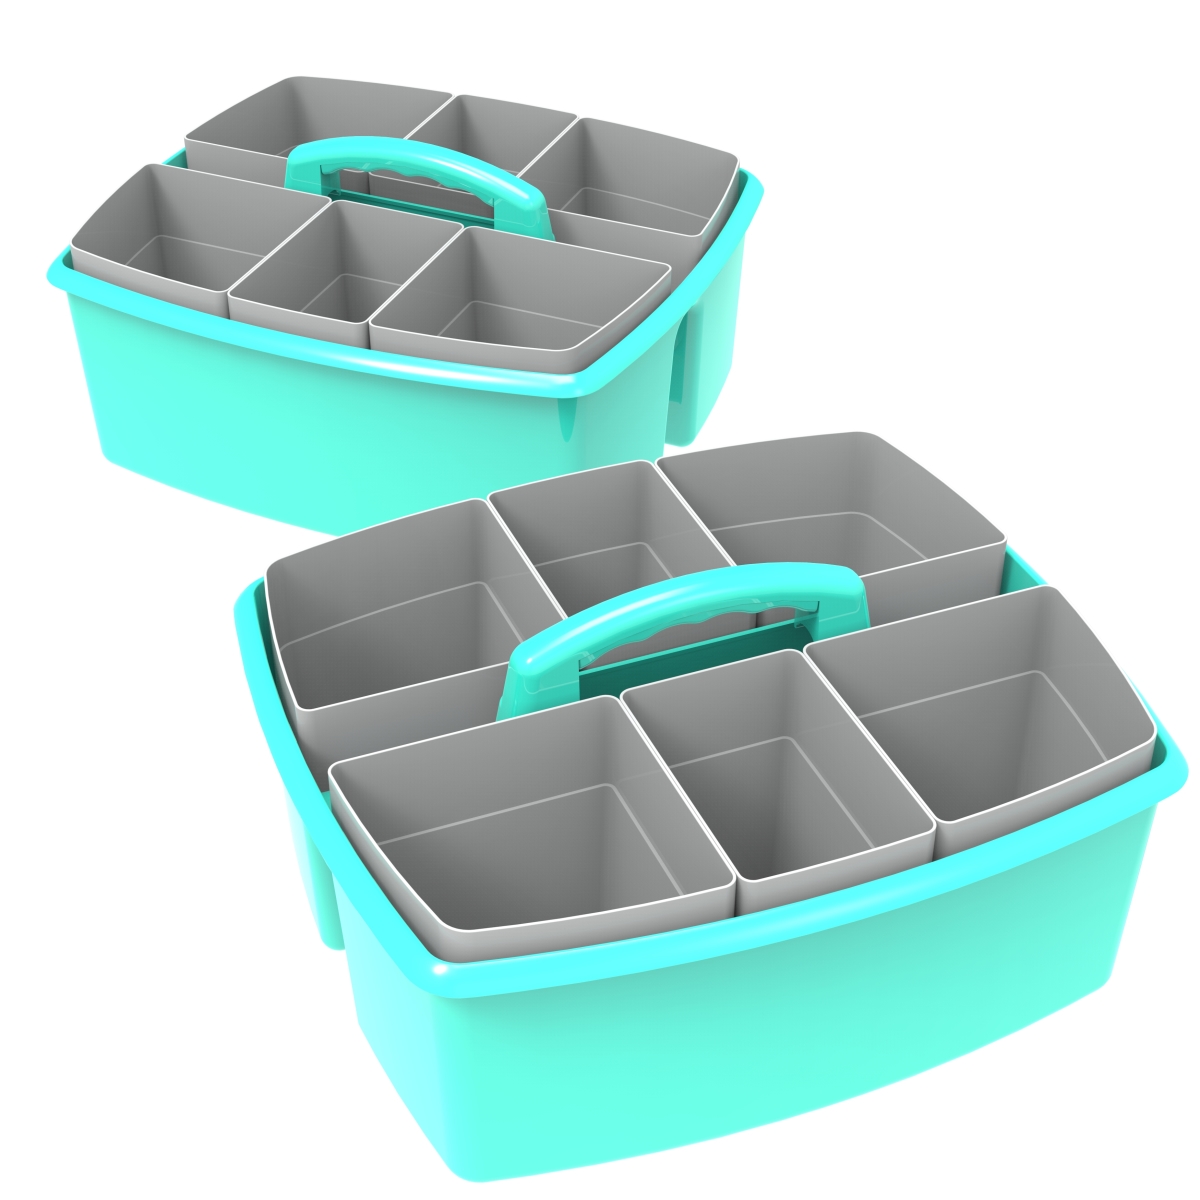 Picture of Storex 00984U02C Large Caddy with Sorting Cups, Teal - Pack of 2